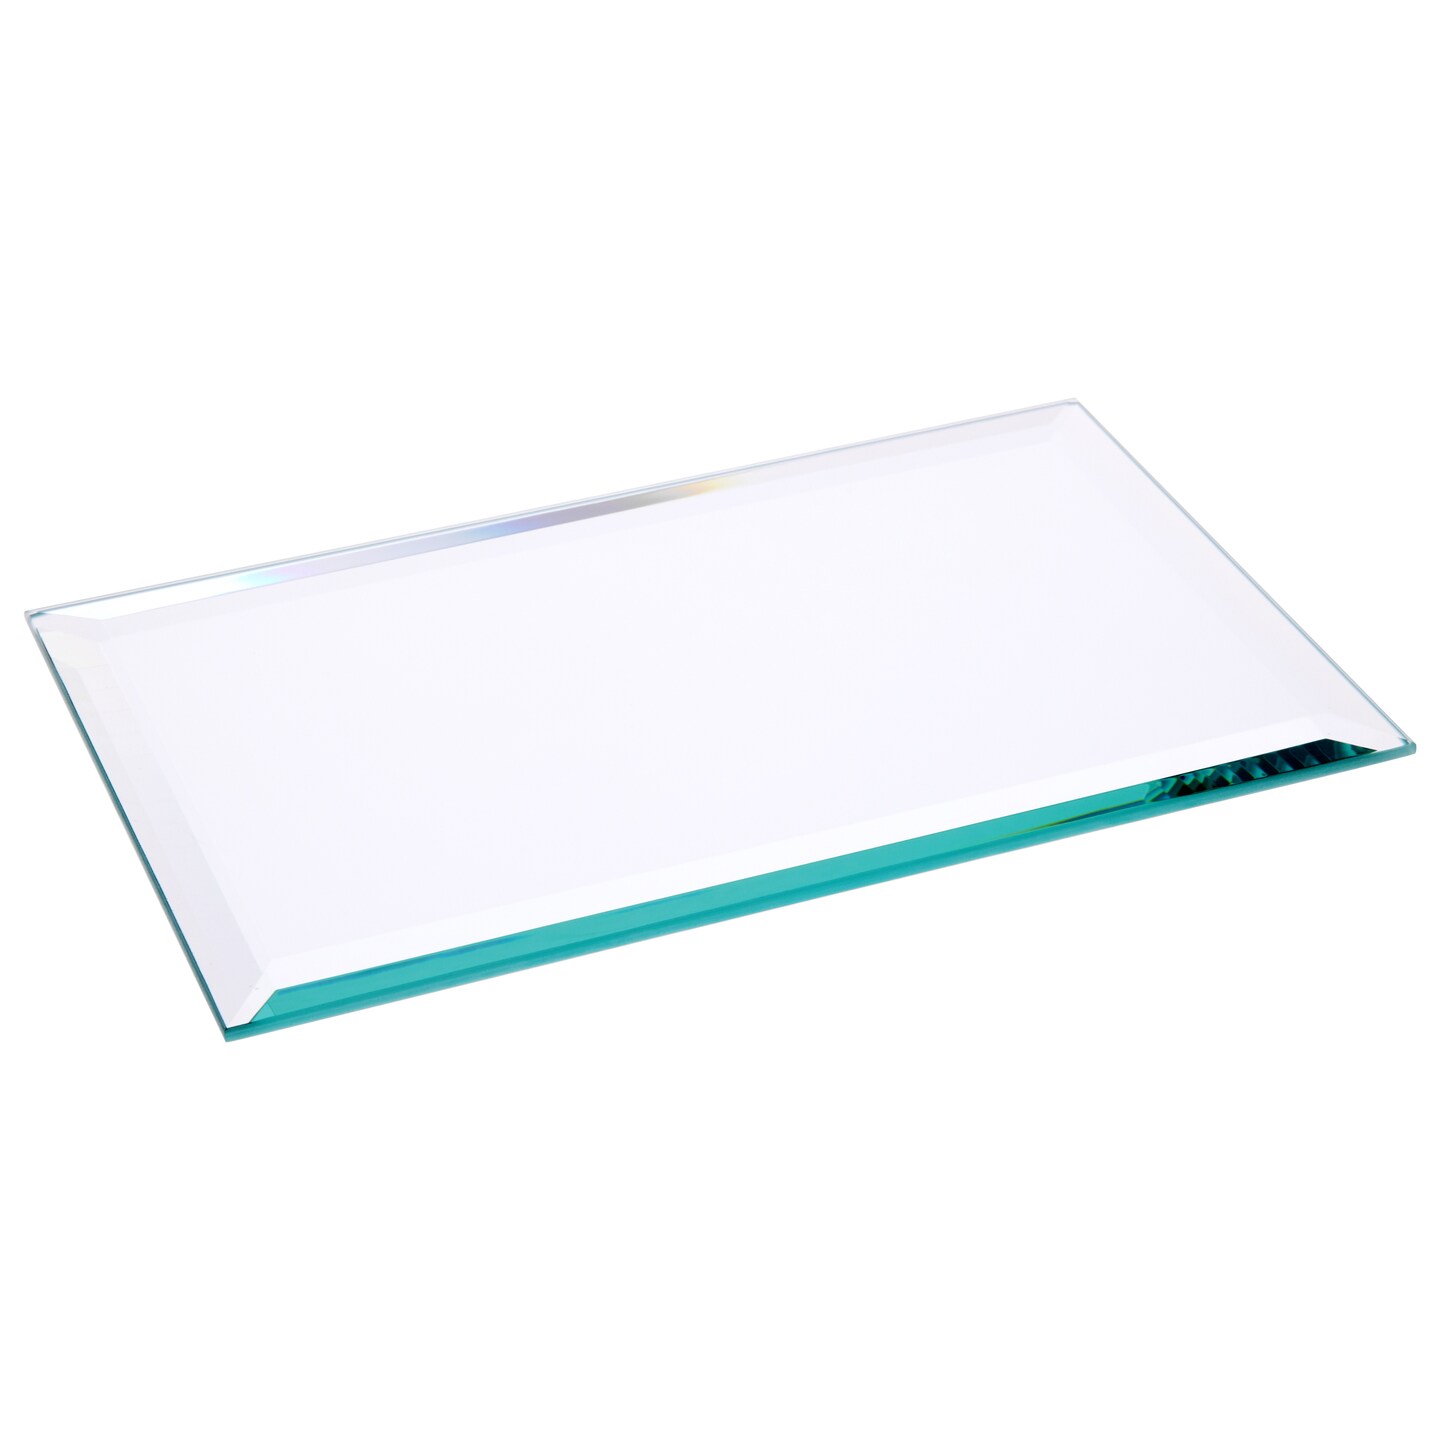 Plymor Rectangle 5mm Beveled Glass Mirror, 5 inch x 8 inch